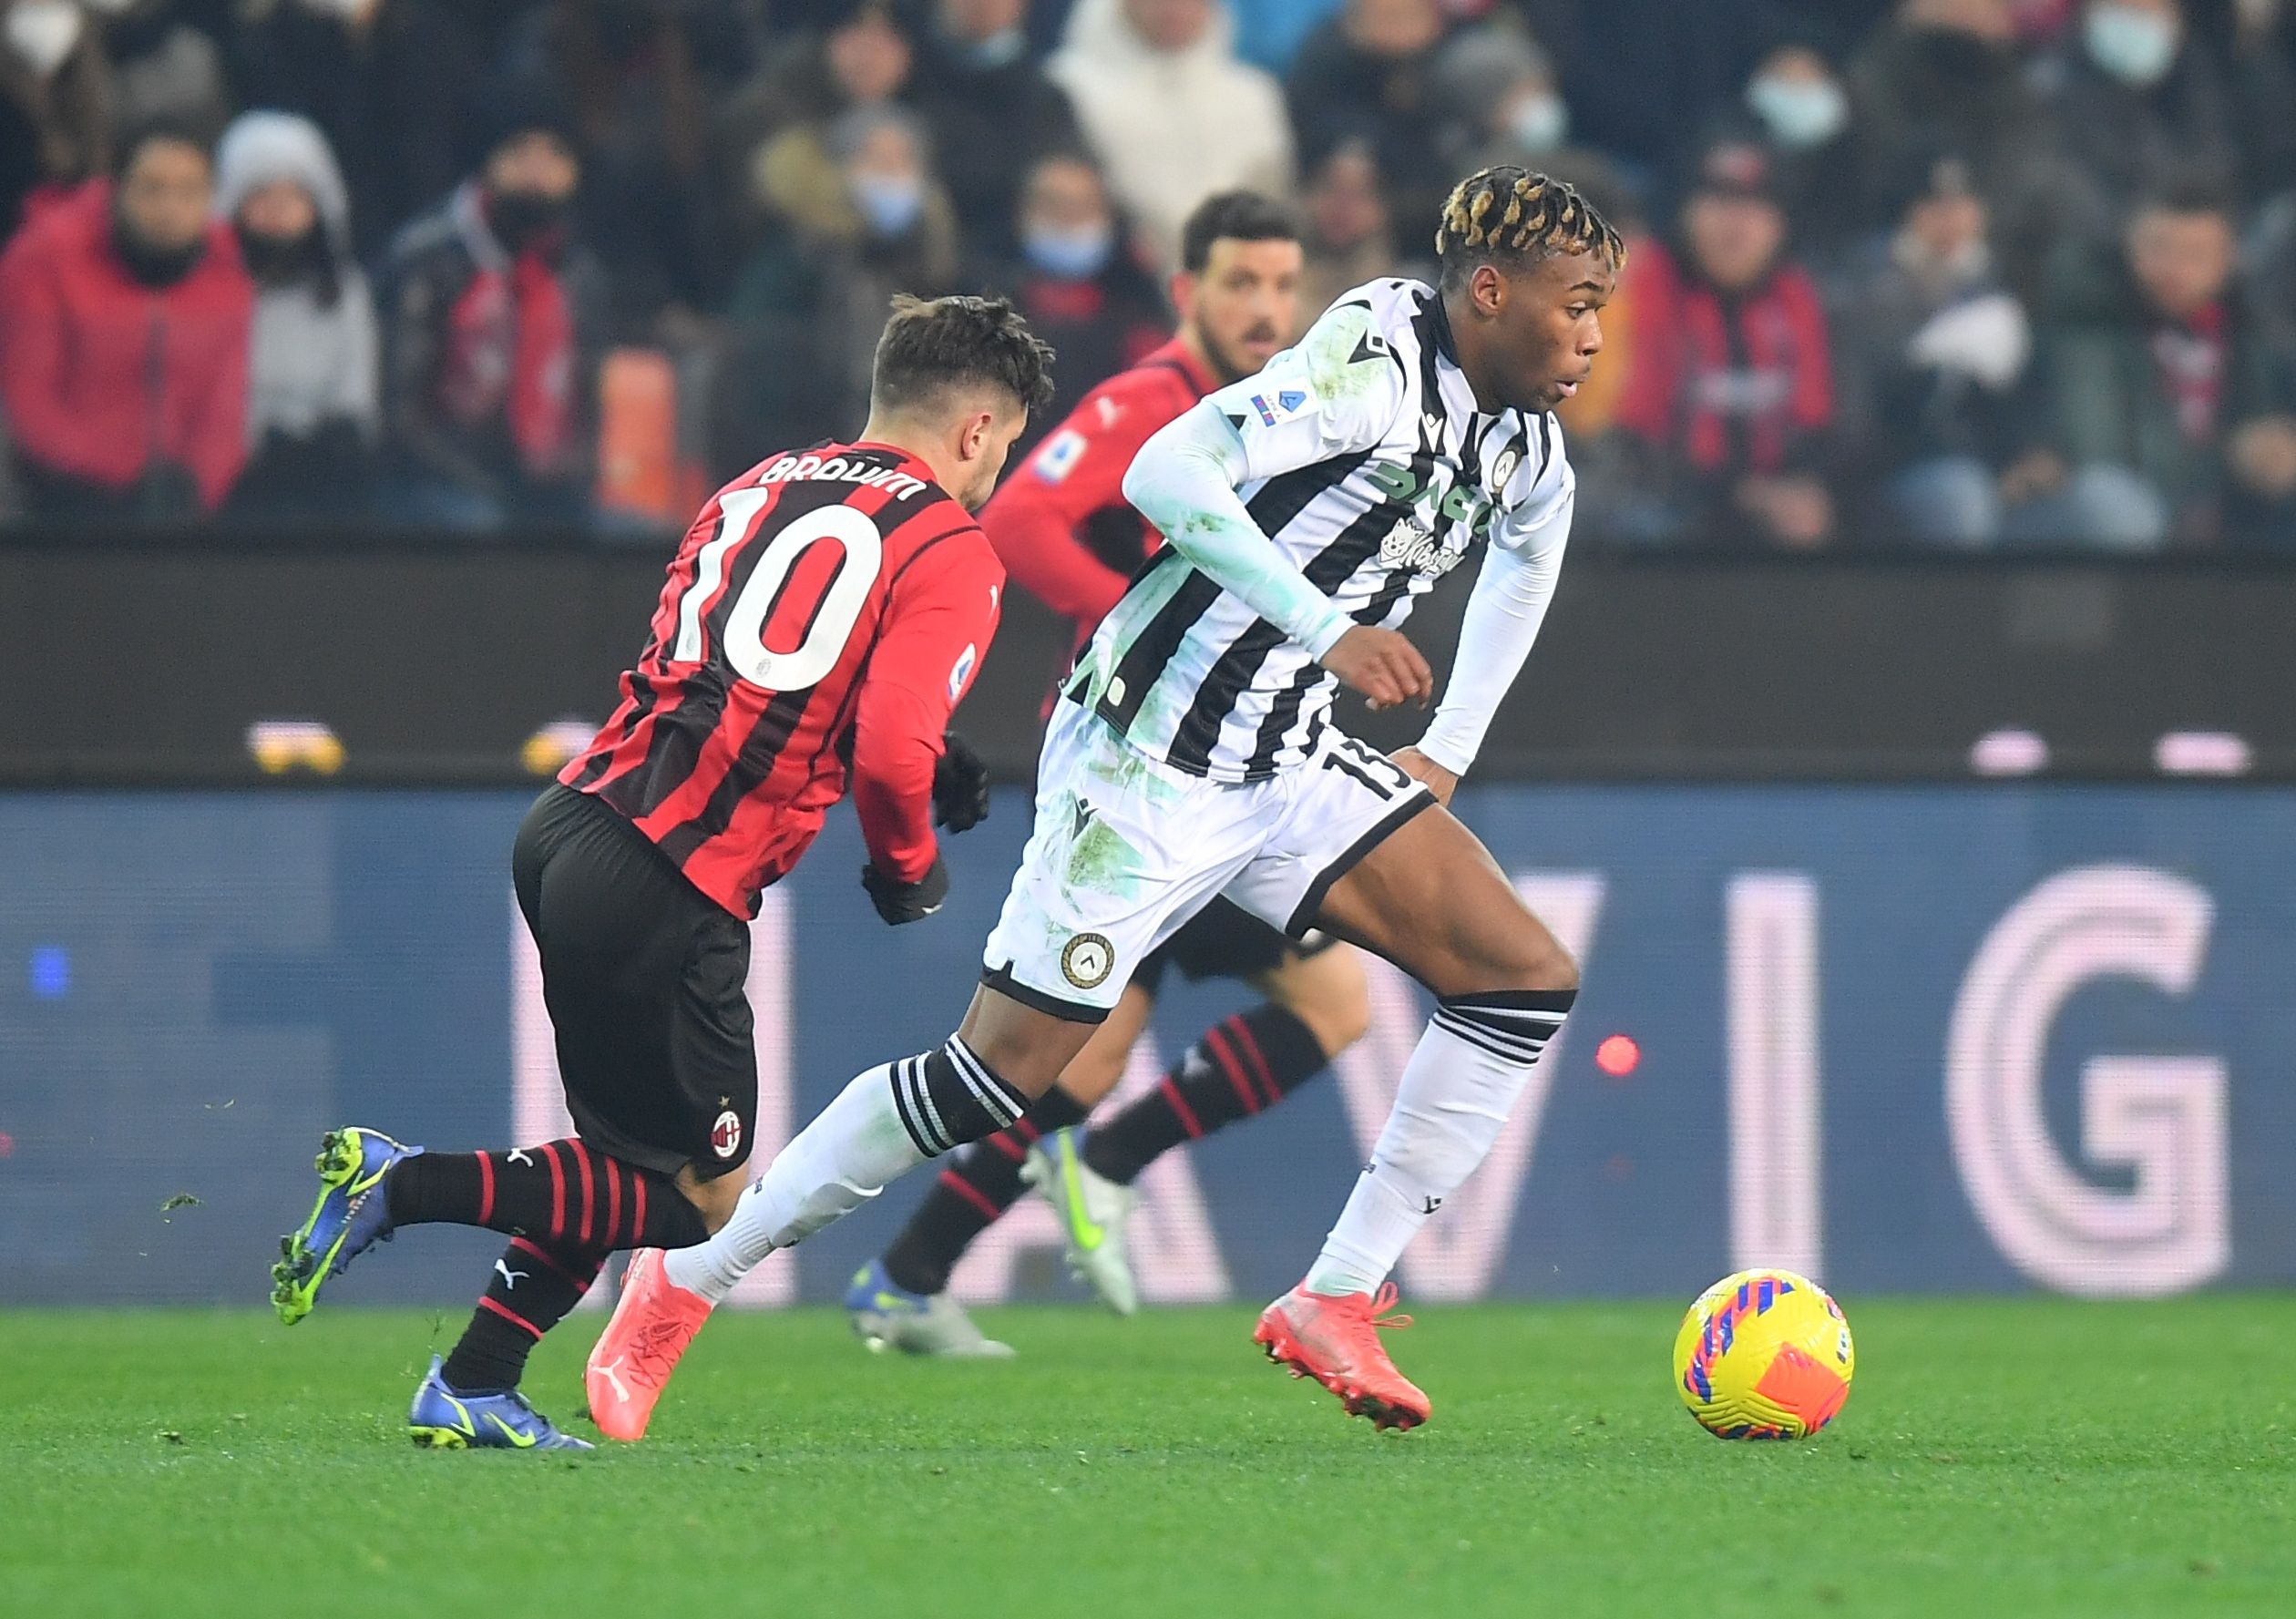 Soccer Football - Serie A - Udinese v AC Milan - Dacia Arena, Udine, Italy - December 11, 2021 Udinese's Destiny Udogie in action with AC Milan's Brahim Diaz REUTERS/Daniele Mascolo